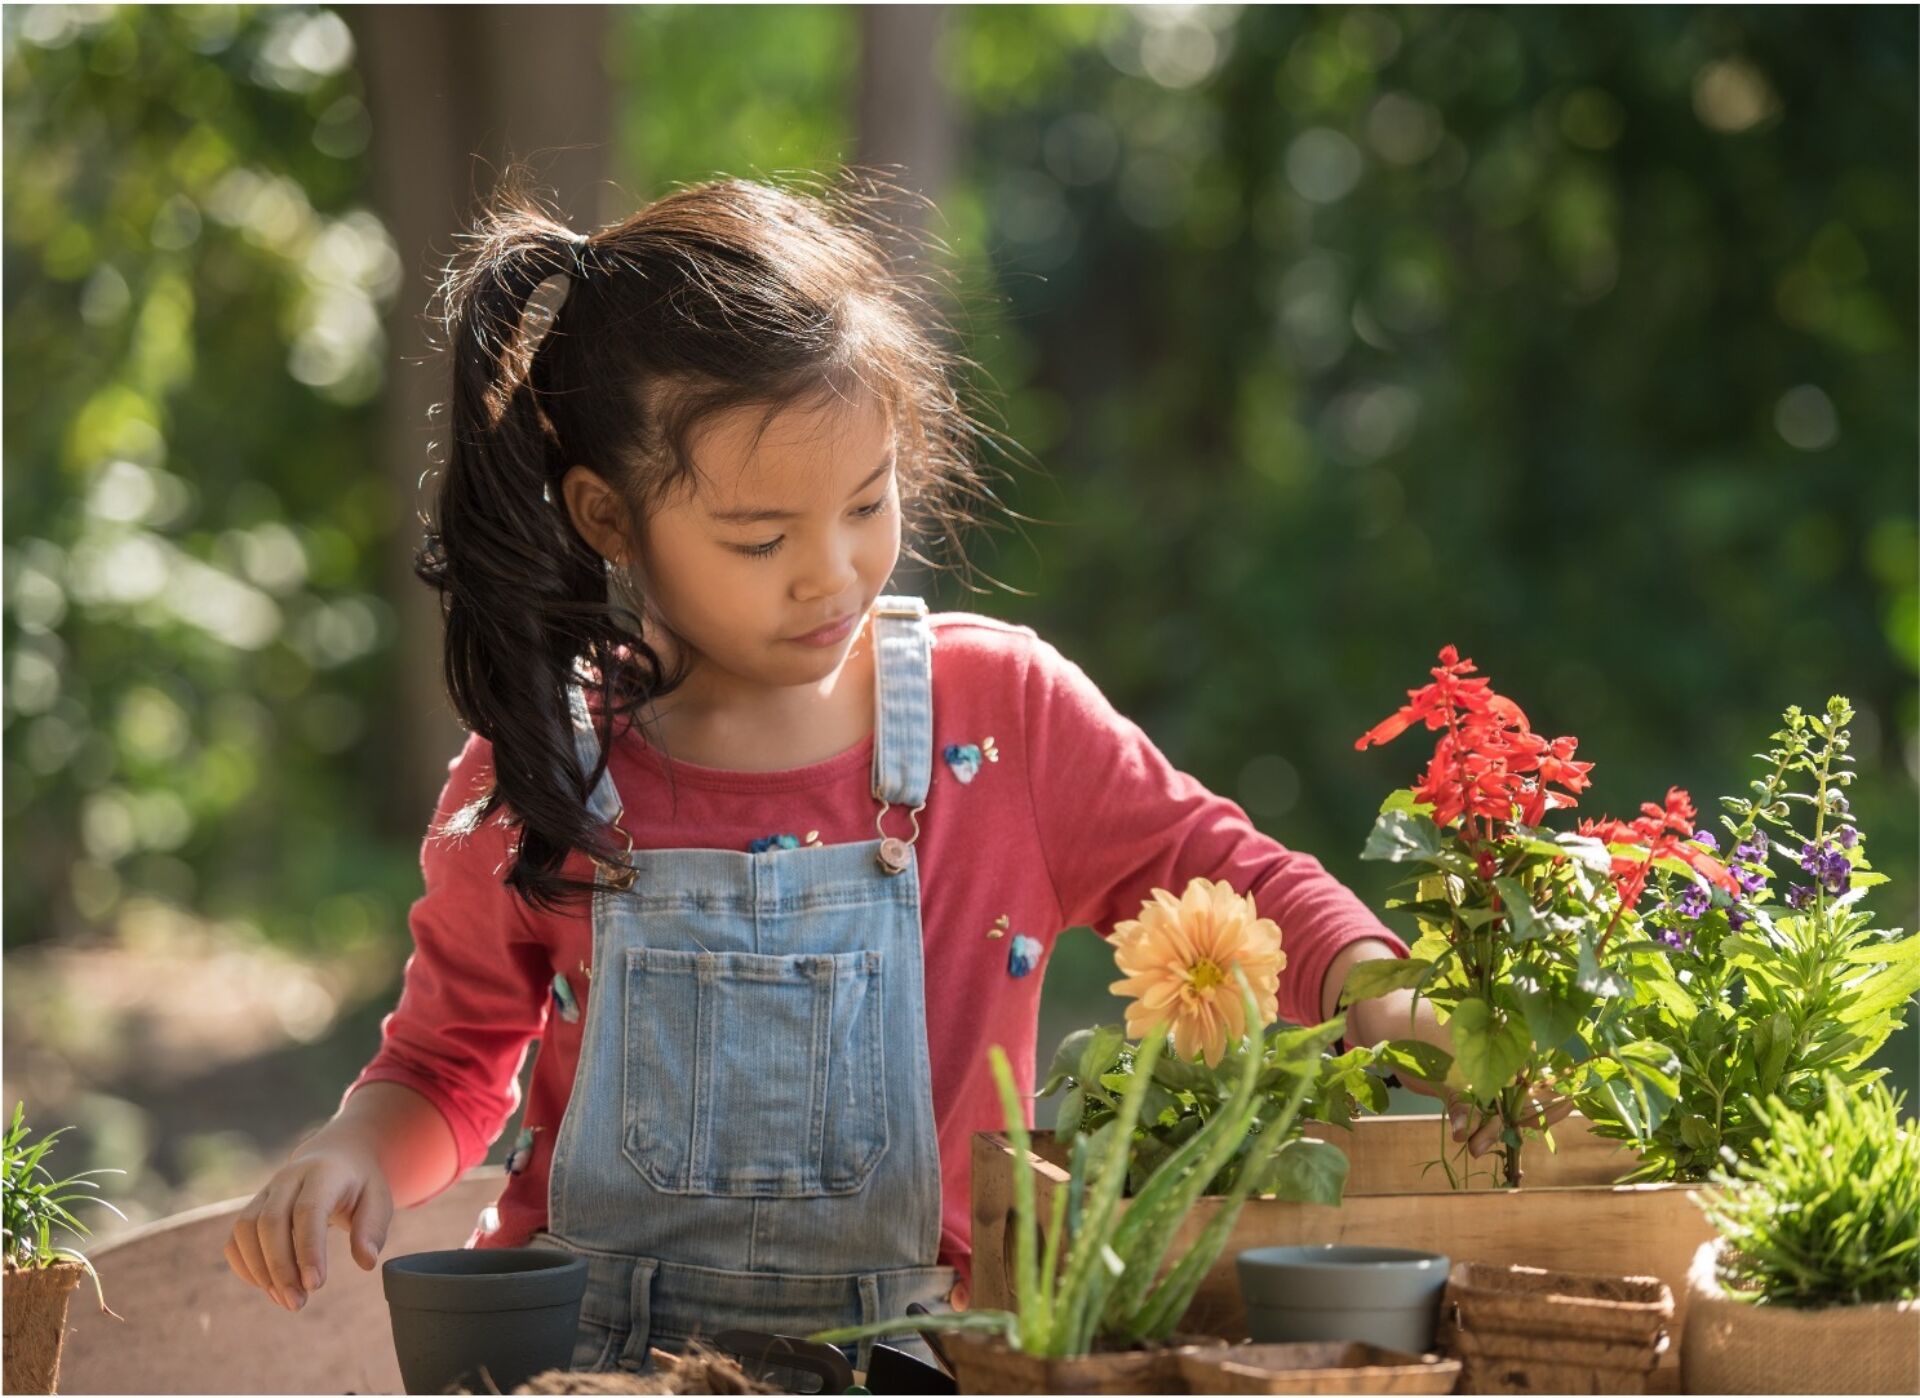 Young child potting flowers